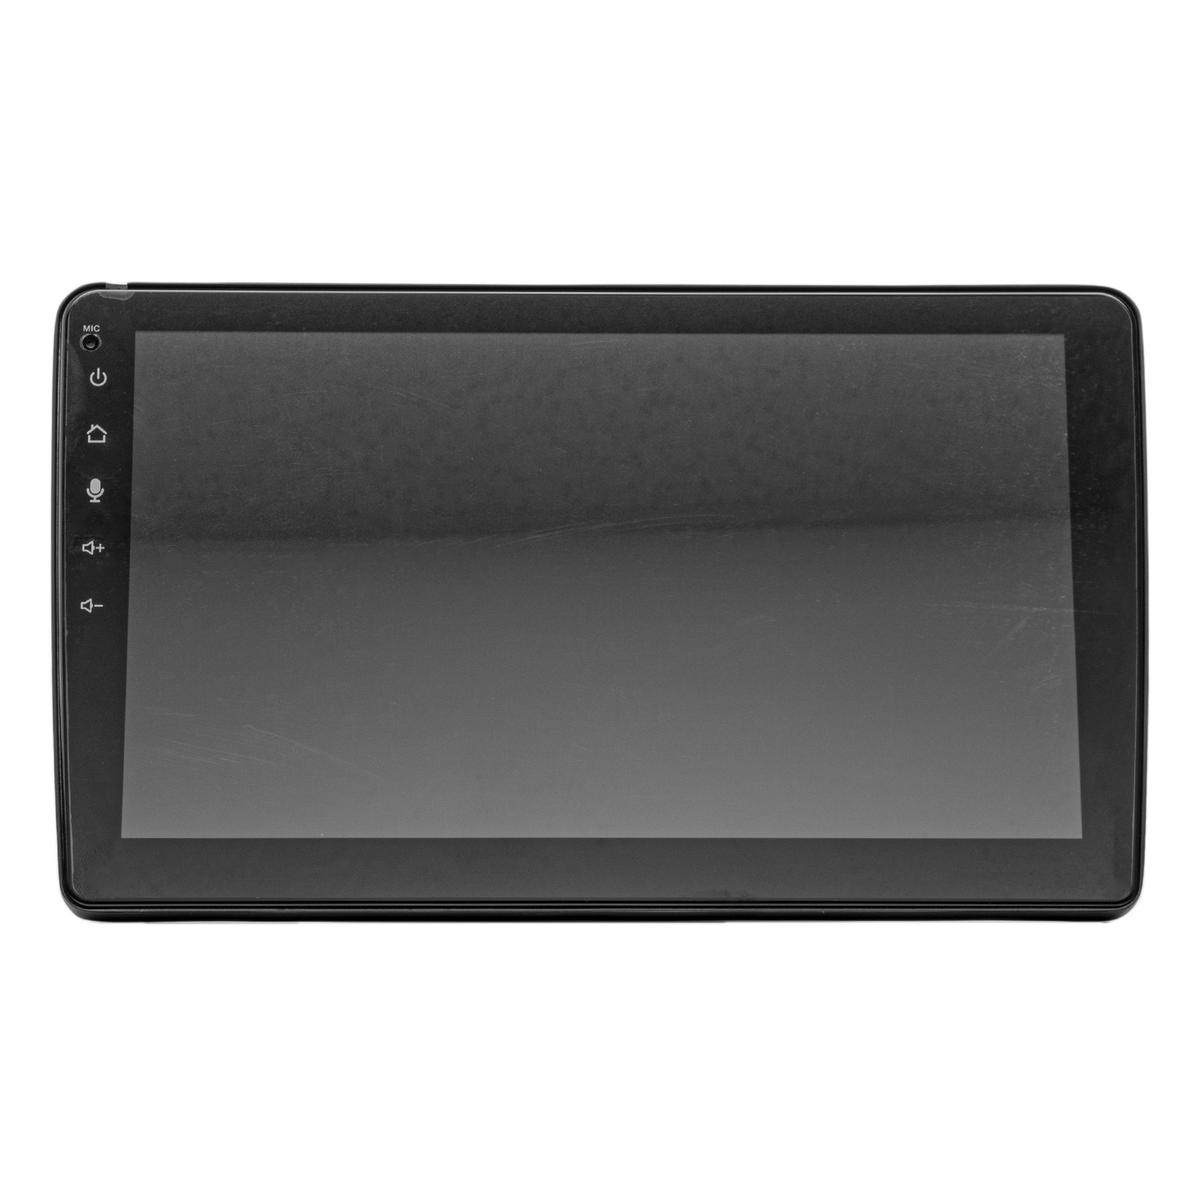 Navitas 10-inch LCD Vehicle Display with Included Backup Camera